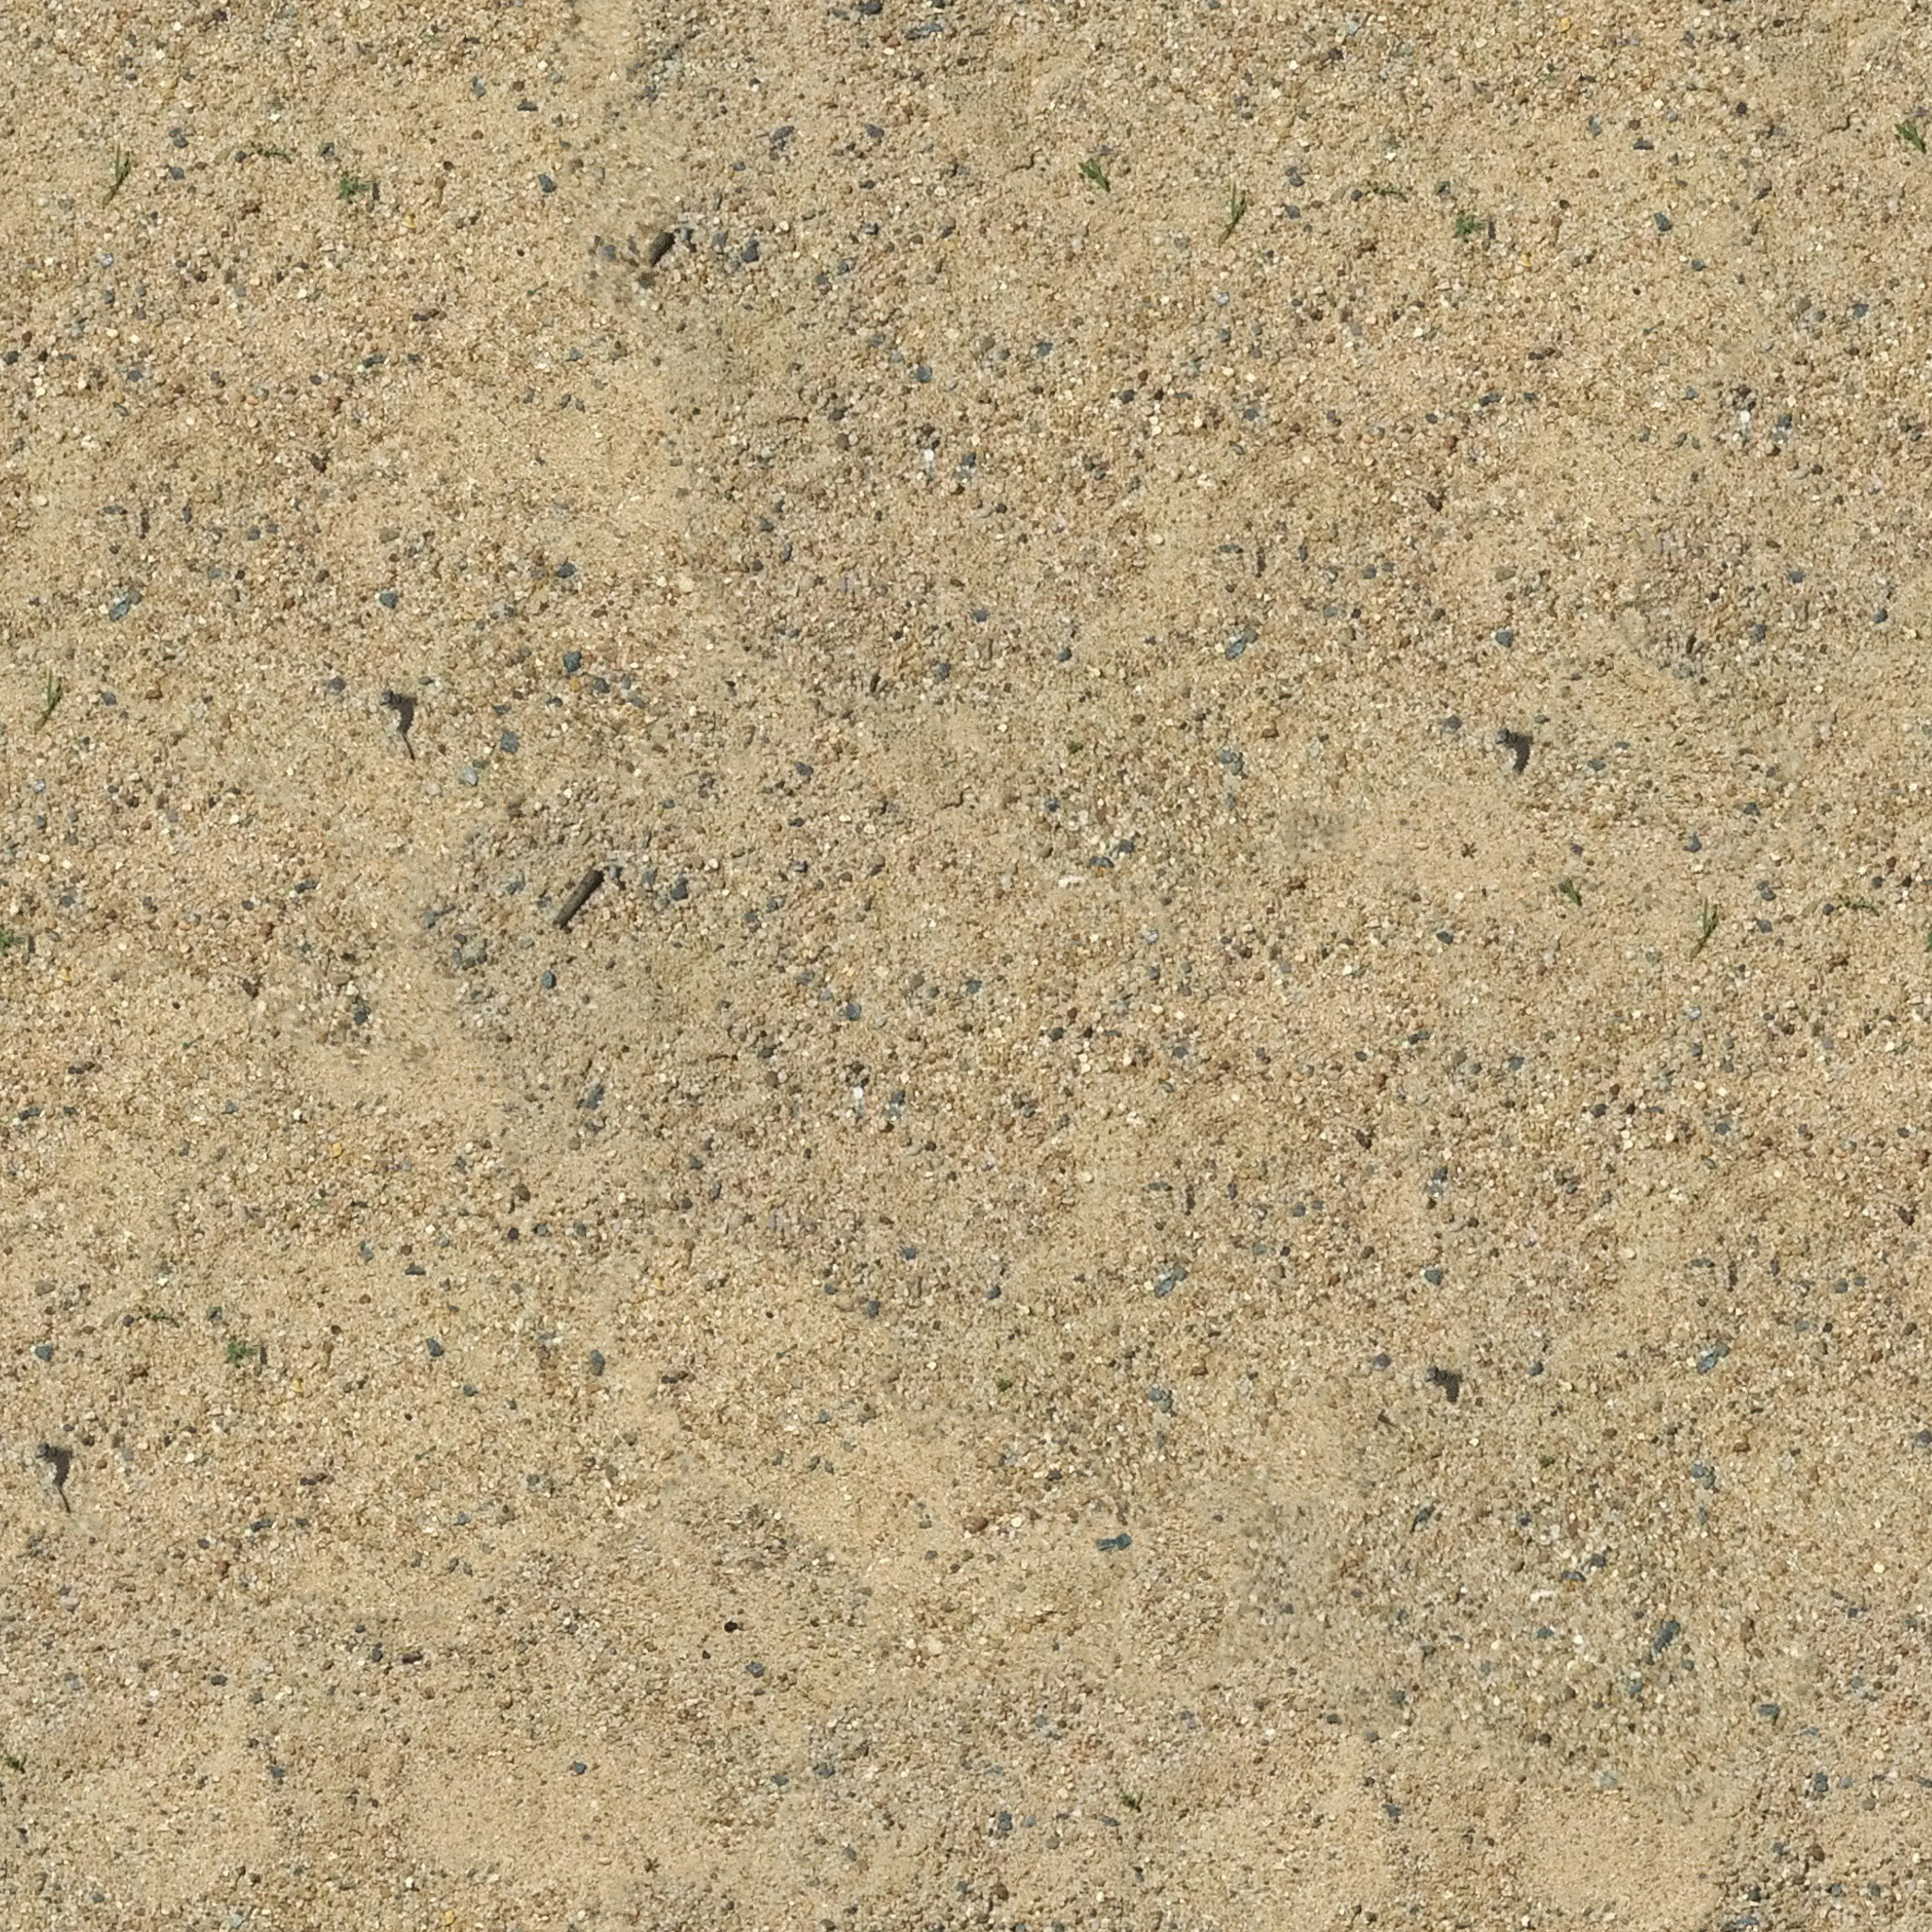 Arid ground textures - sand_03_2048x2048.png | OpenGameArt.org